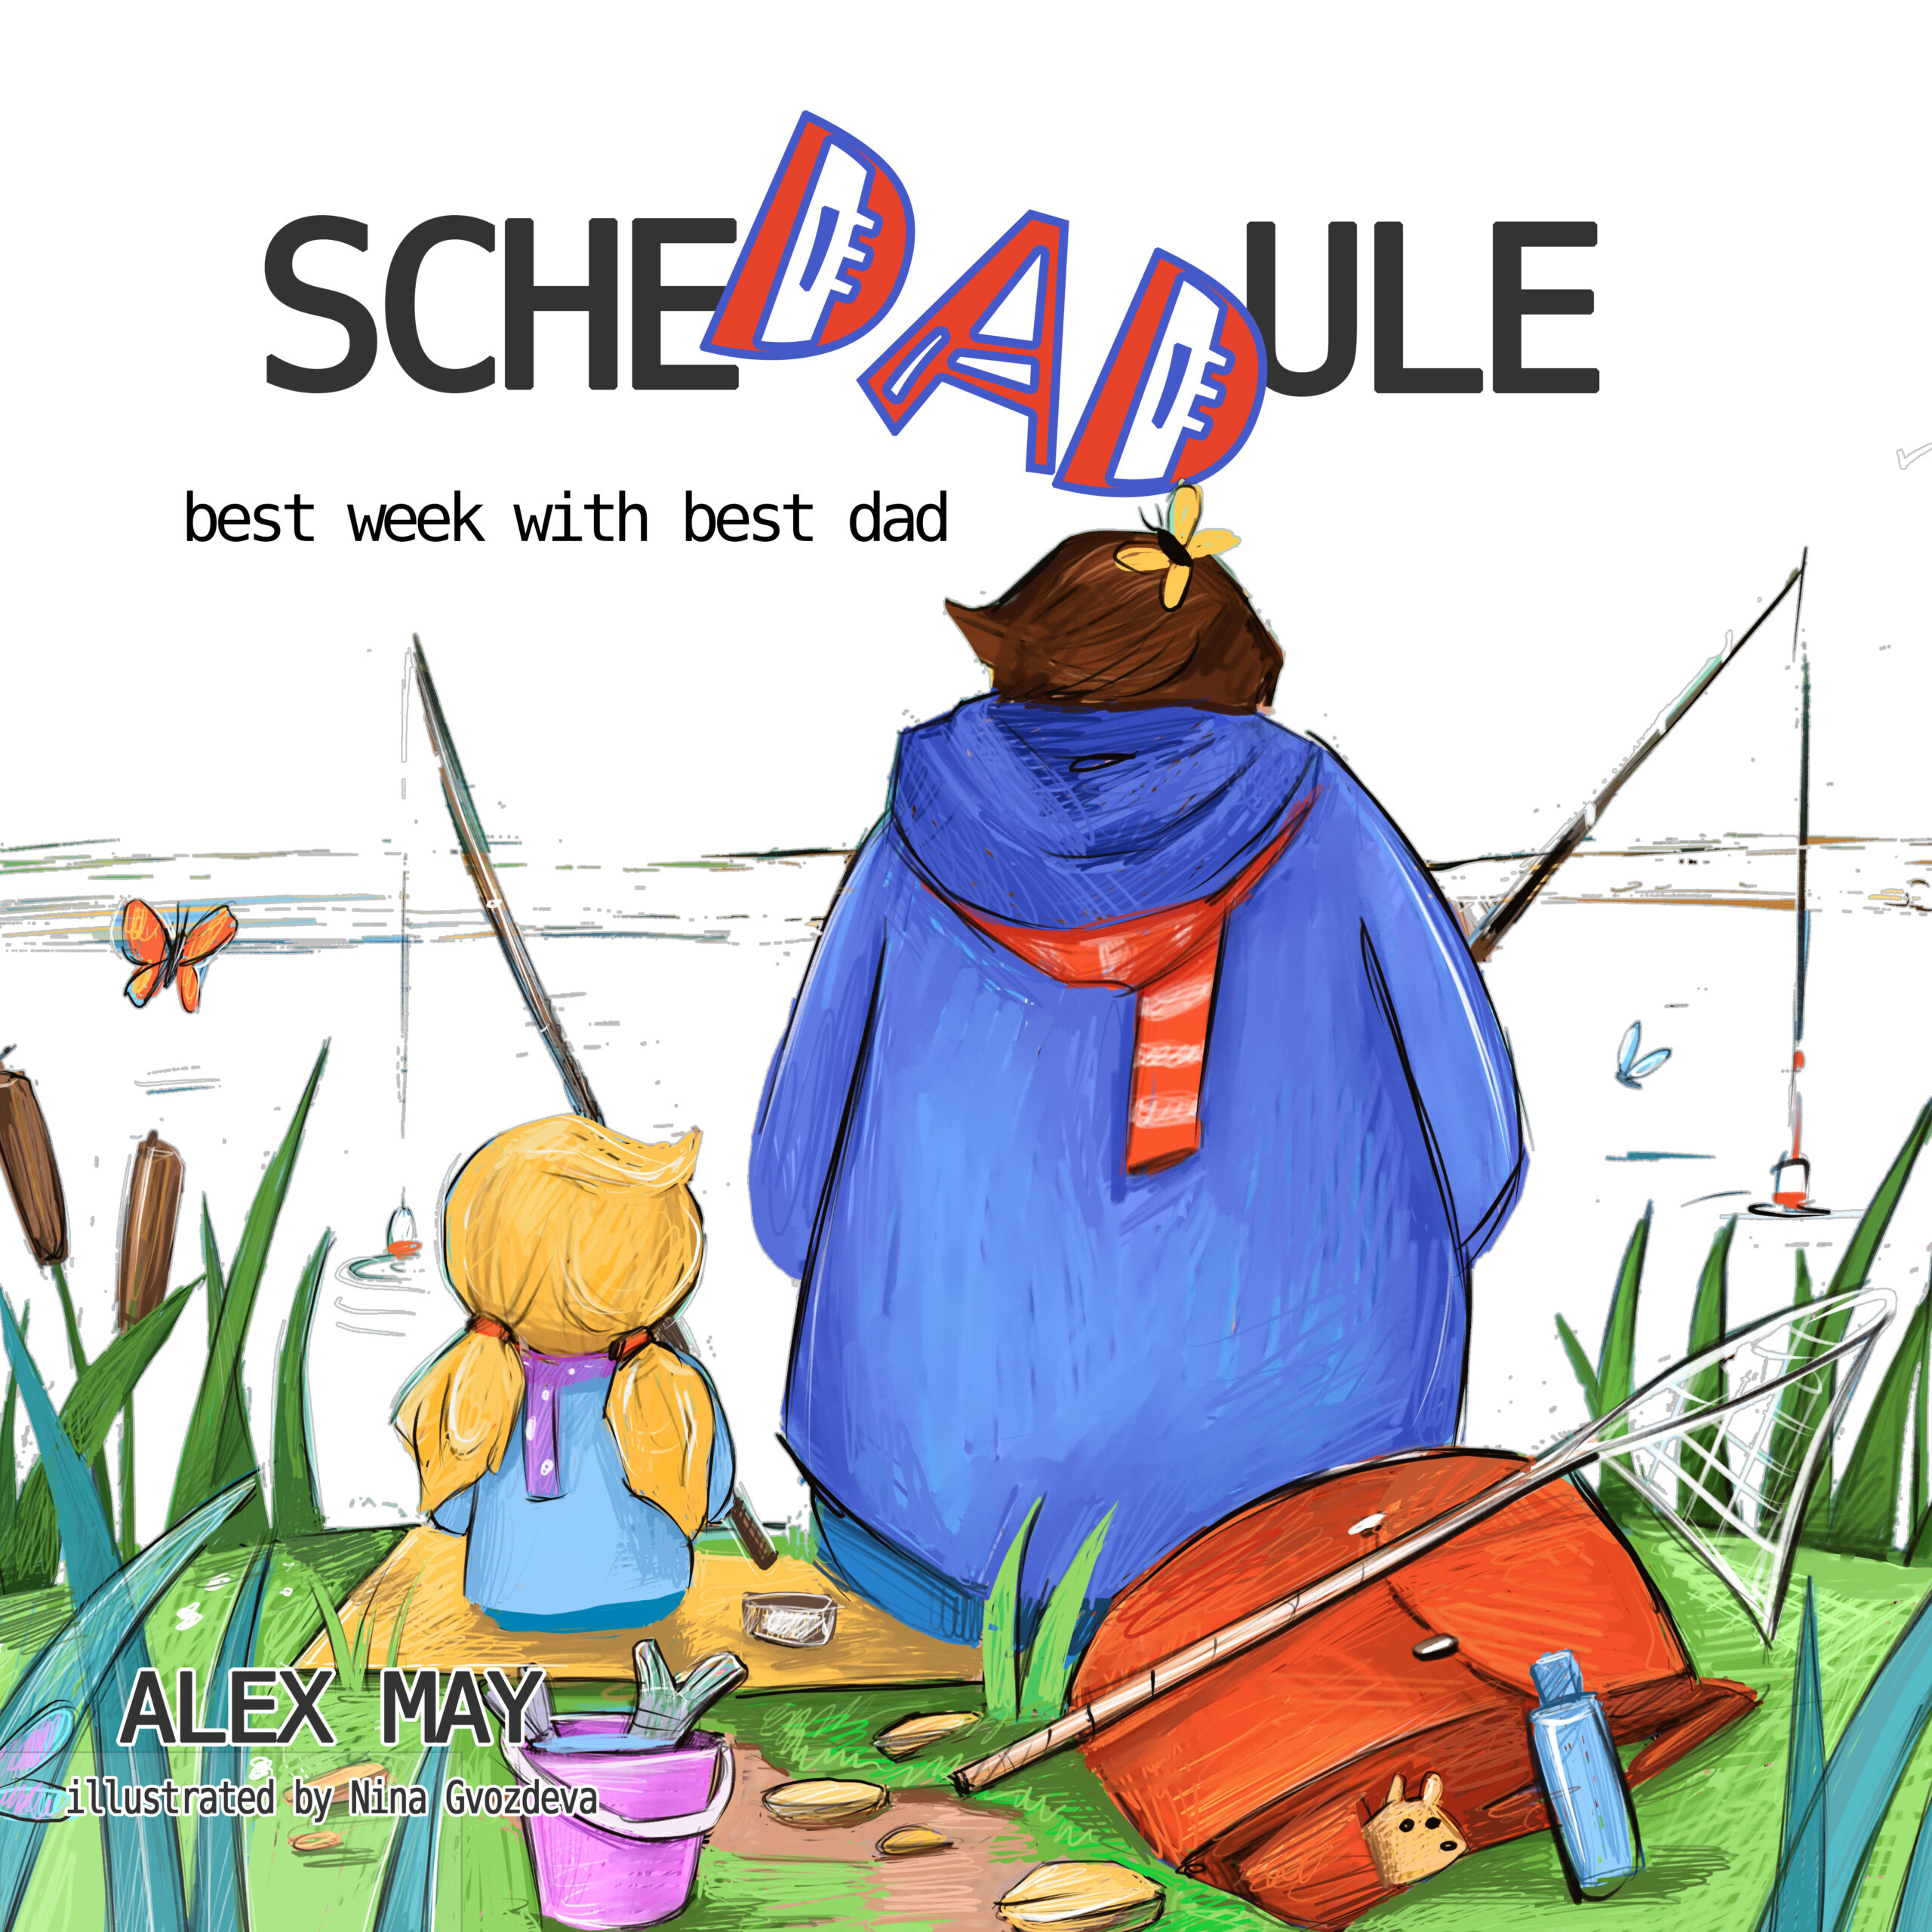 FREE: ScheDADule (Best Dad & Daughter Week): Gift for Dad from Daughter. Poetry by Alex May